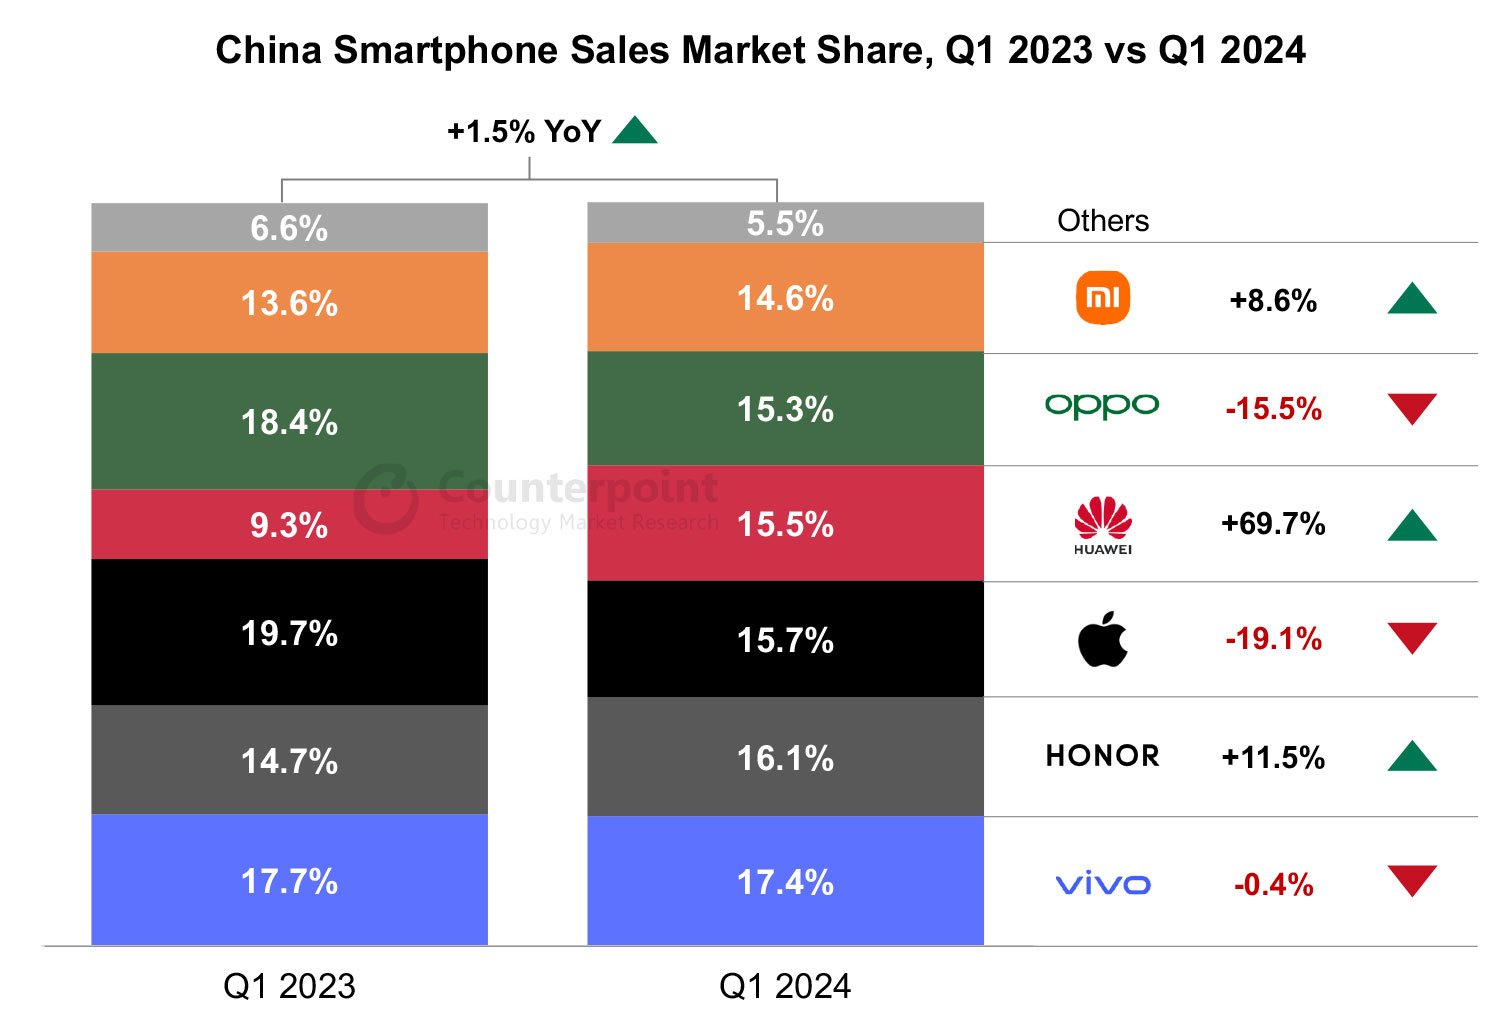 Counterpoint Smartphones Chine